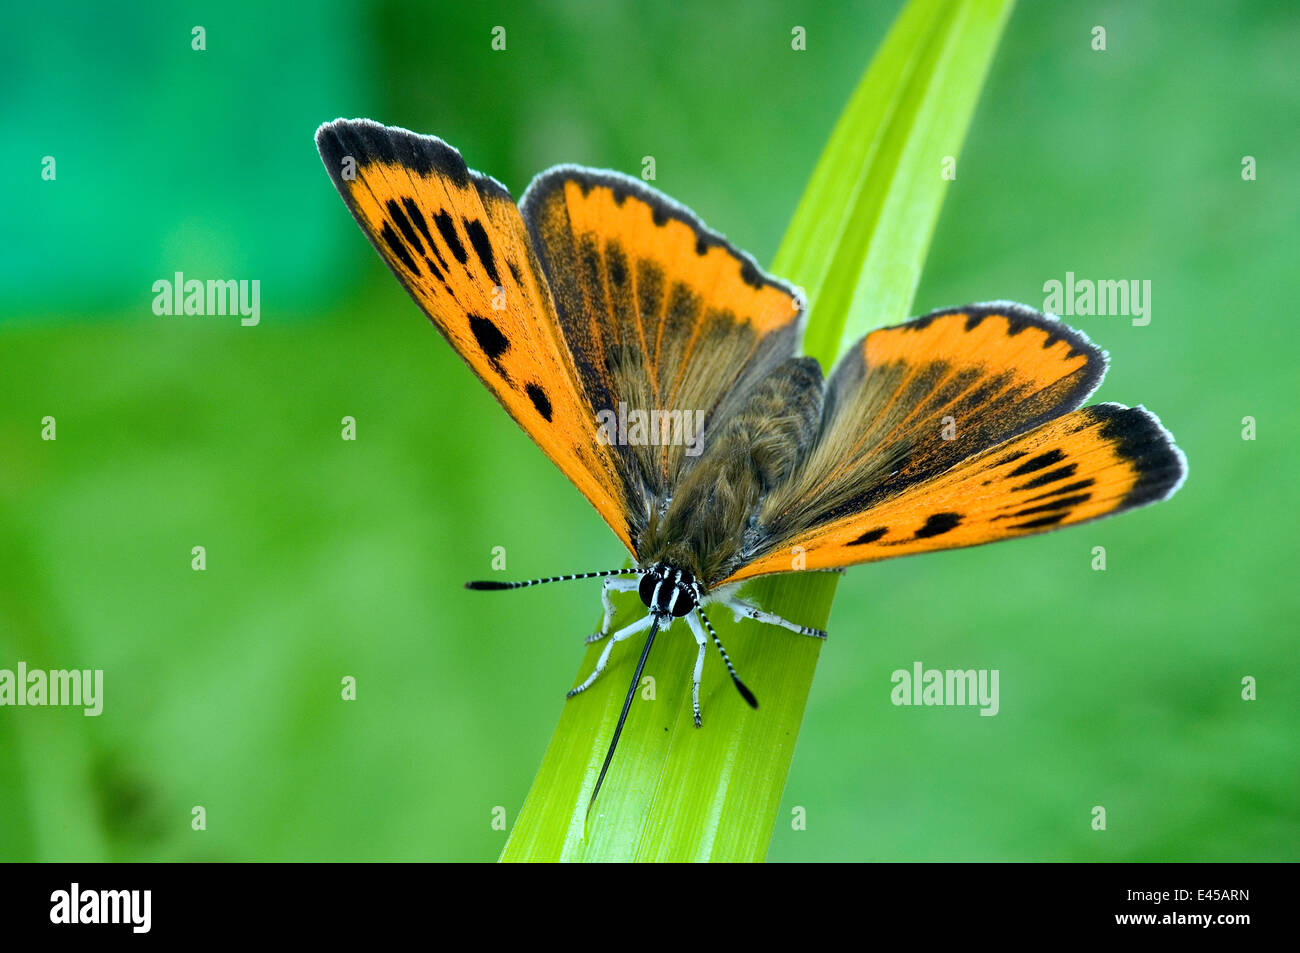 Large Copper Butterfly (Lucaena dispar) Wings open with proboscis fully extended drinking moisture from leaf. UK. Captive. Stock Photo